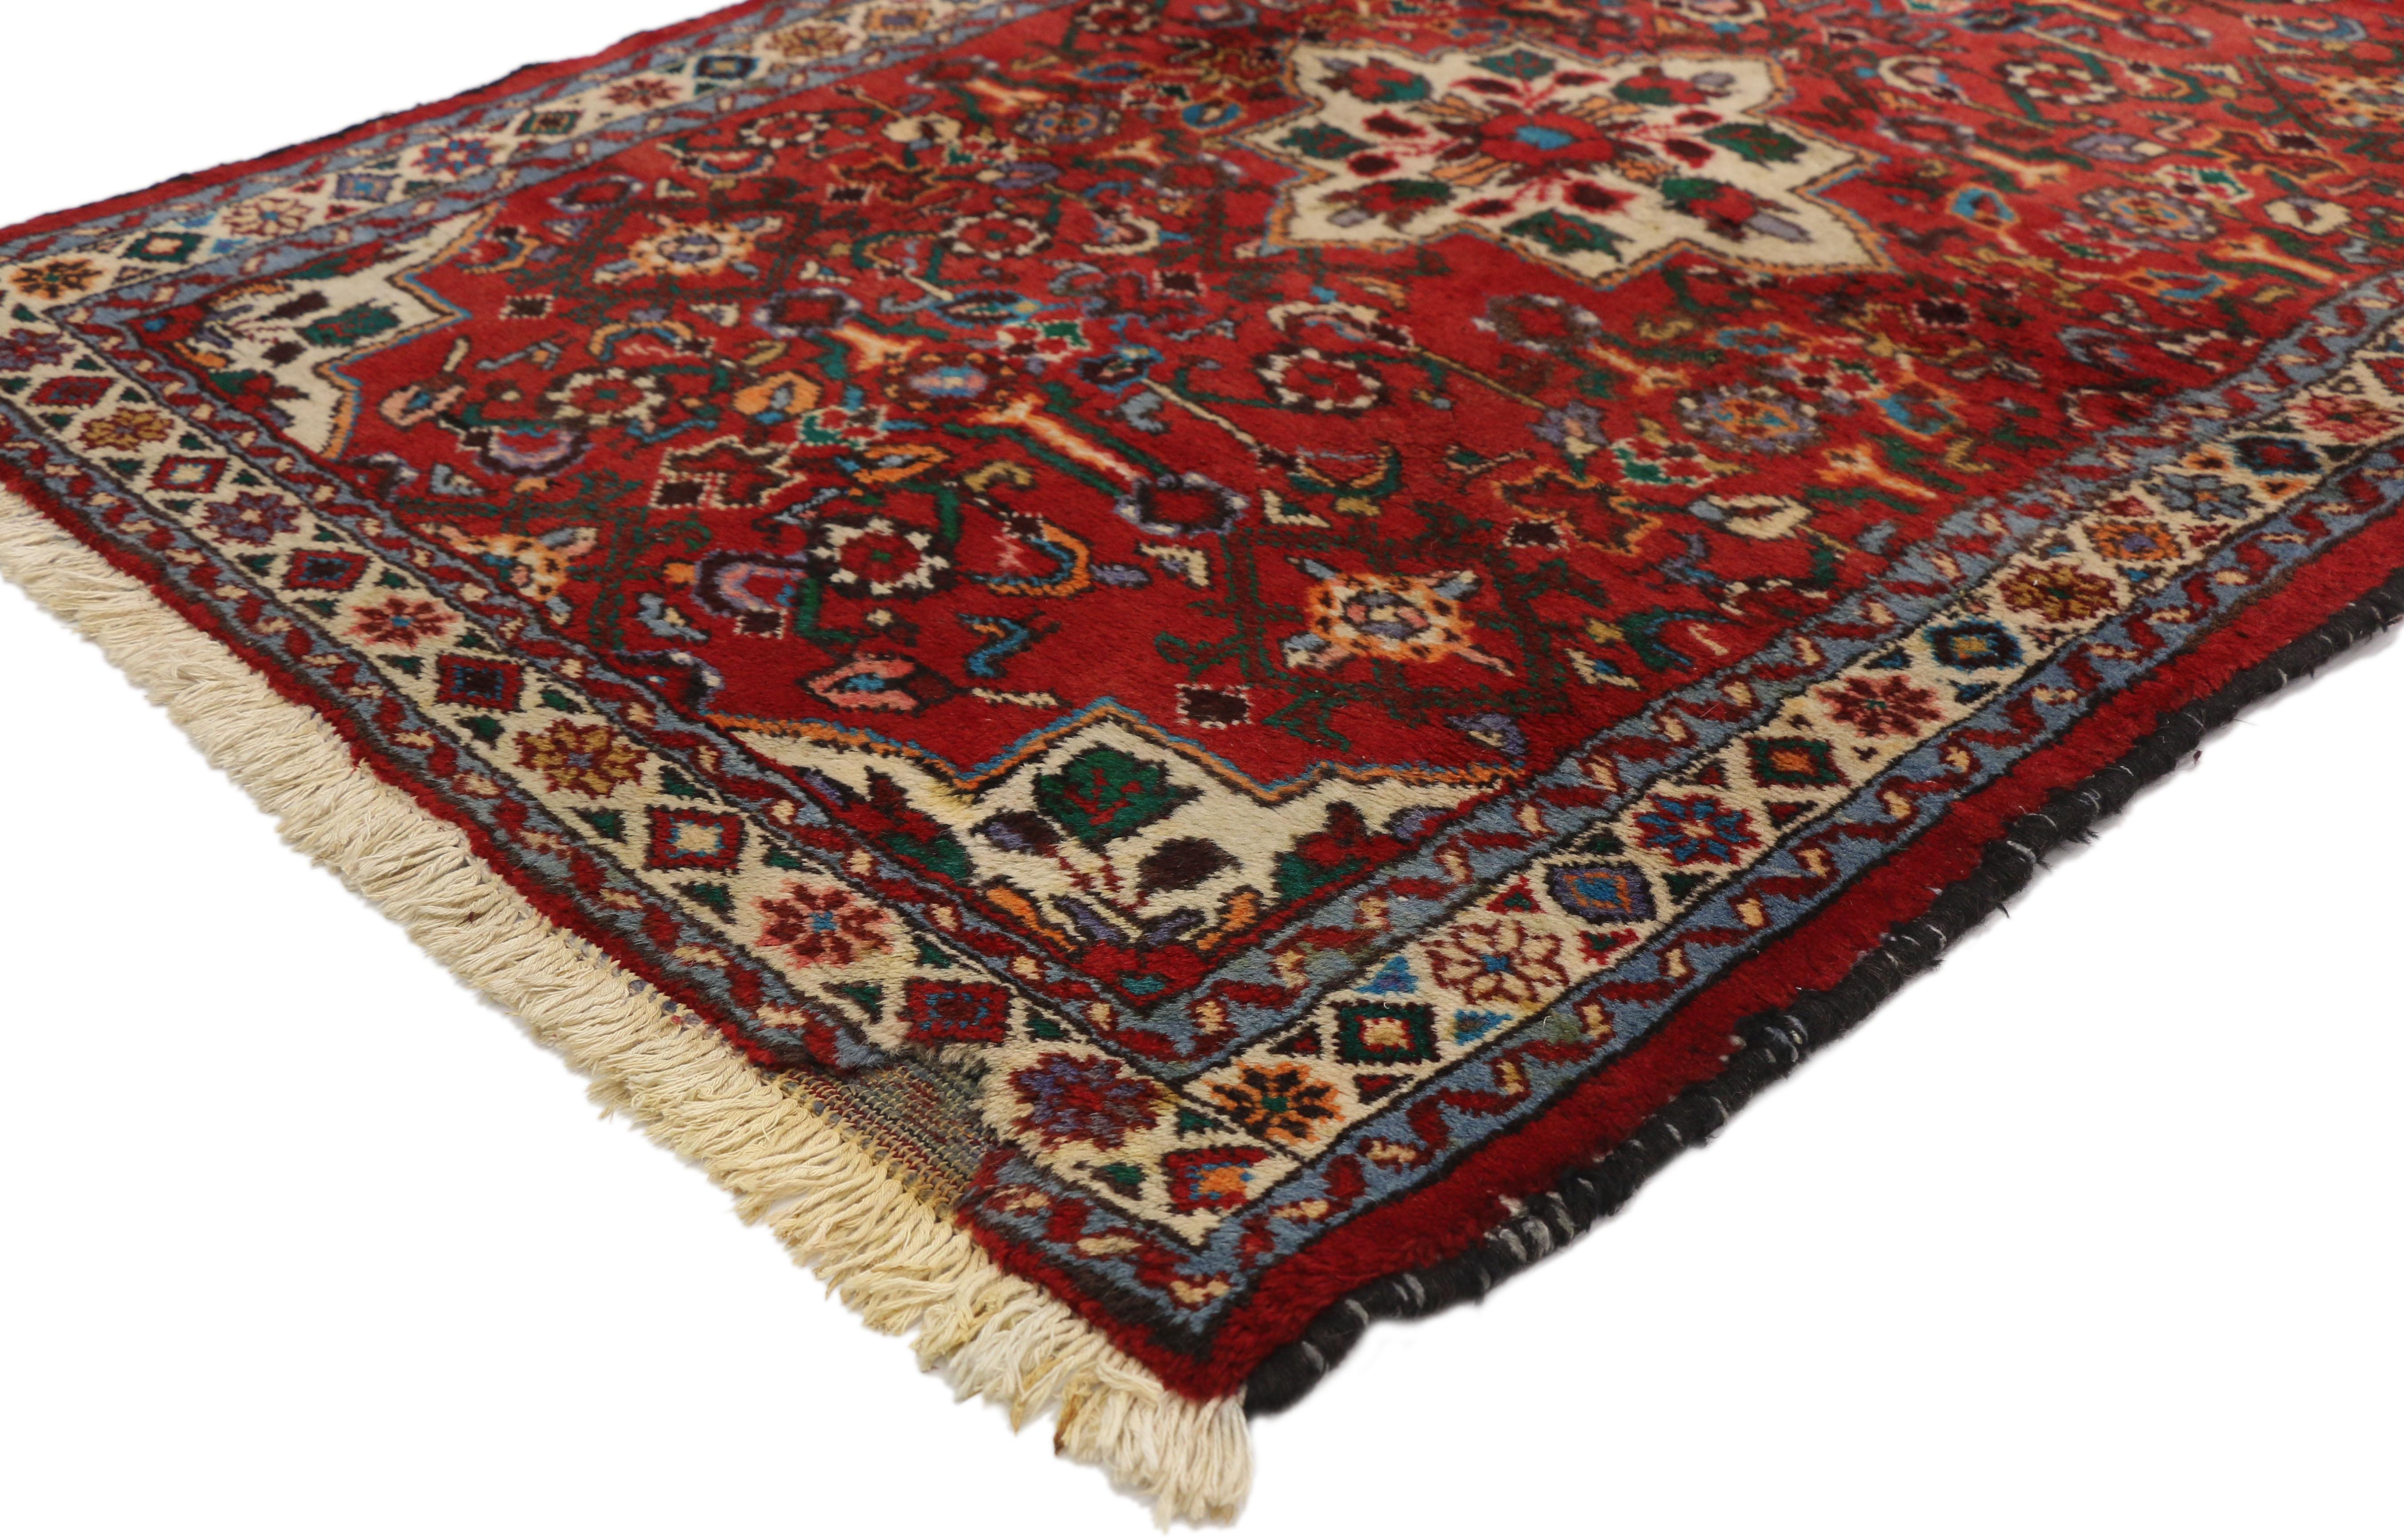 60272, vintage Persian Borchelou Hamadan rug - Entry or Foyer rug. This Vintage Persian Borchelou Rug is a gem. Luxurious and sumptuous this accent rug will charm guests at your entryway, hearth, or bedroom. Set with a humble white diamond with red